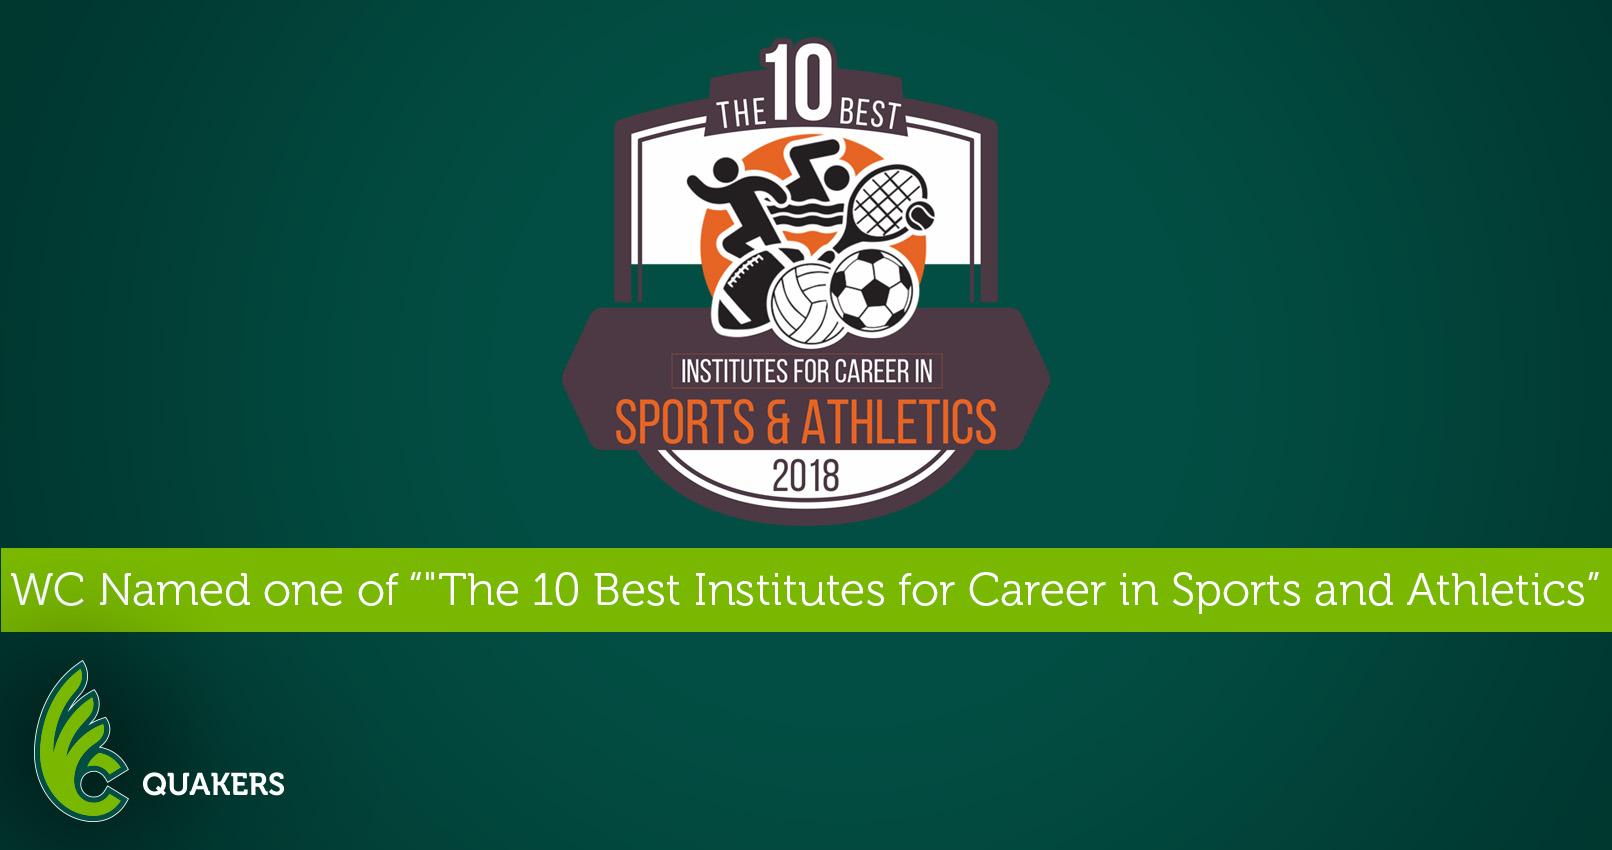 Wilmington Named One of "The 10 Best Institutions for Careers in Sports and Athletics in 2018"